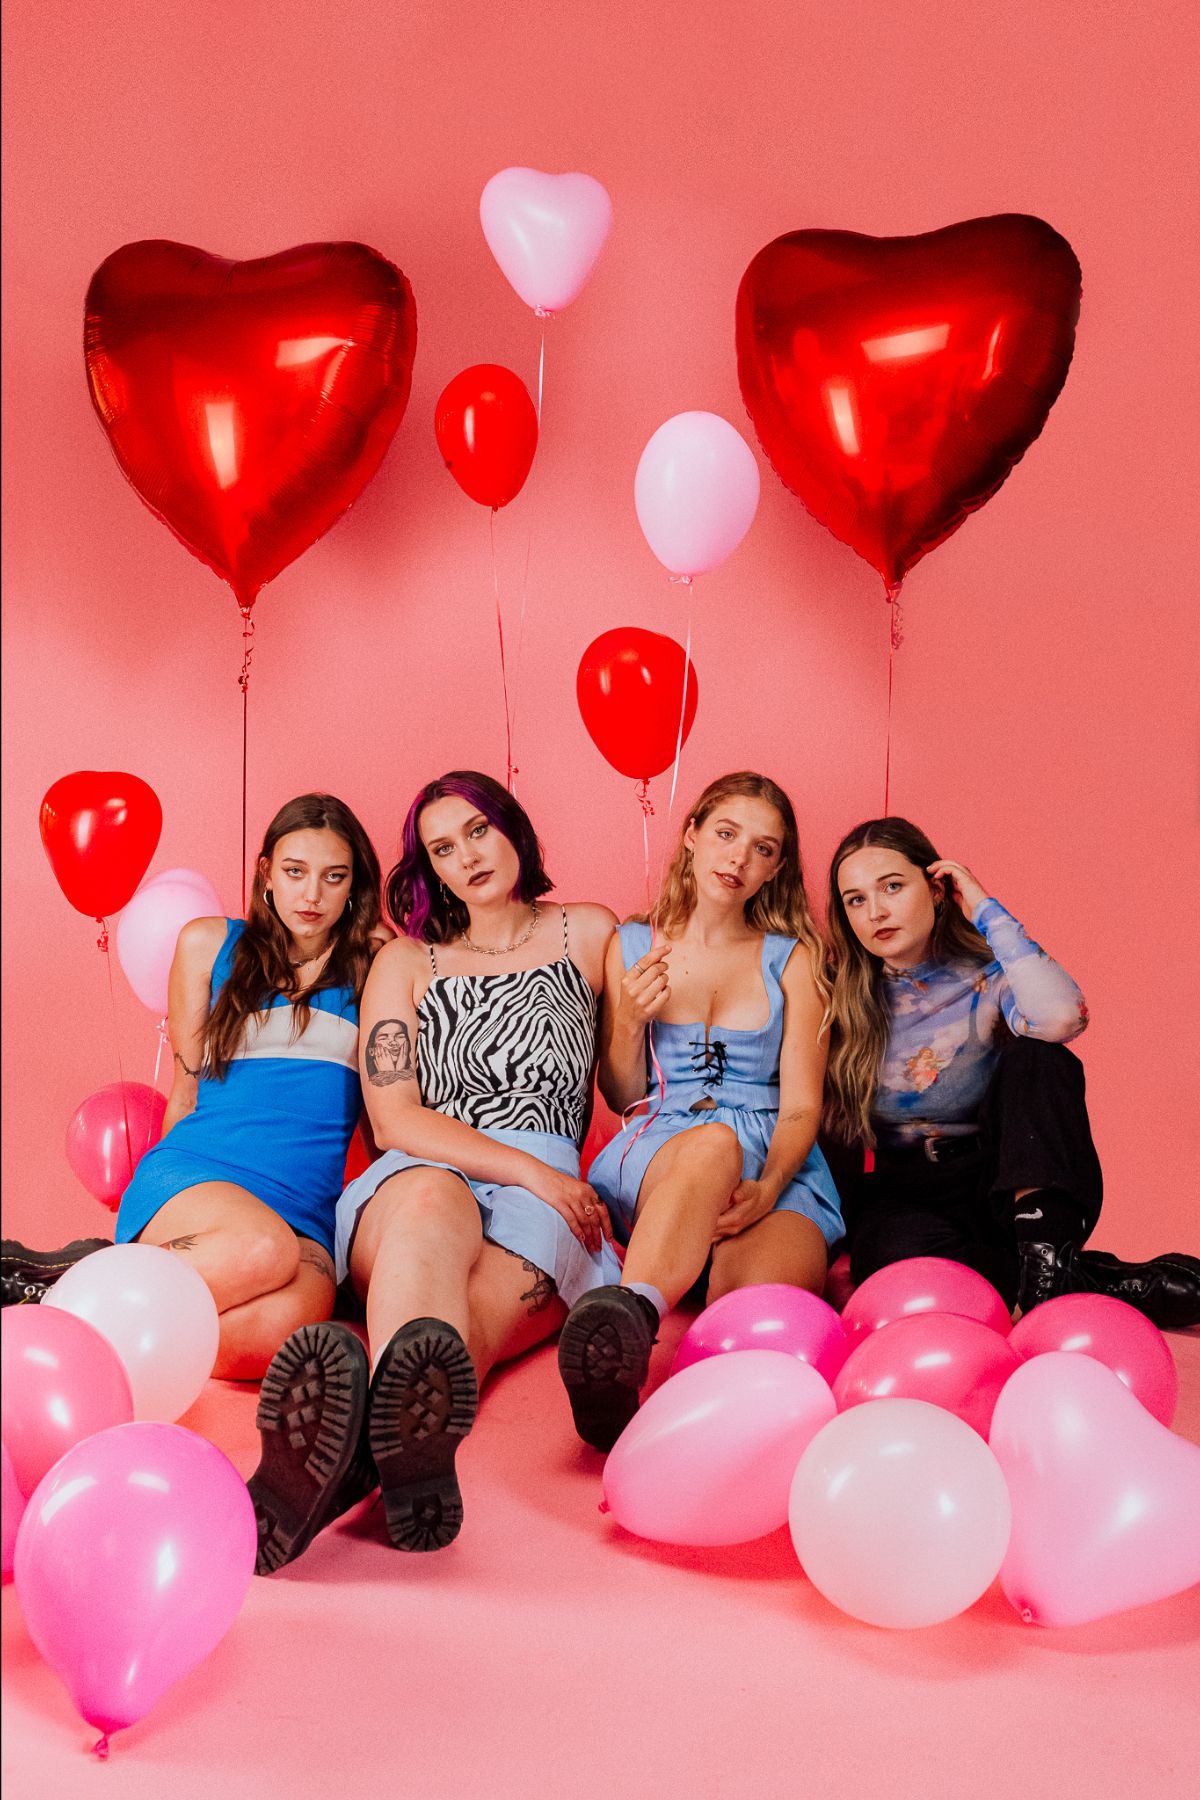 TEEN JESUS AND THE JEAN TEASERS REVEAL NEW SINGLE ‘MISS YOUR BIRTHDAY’